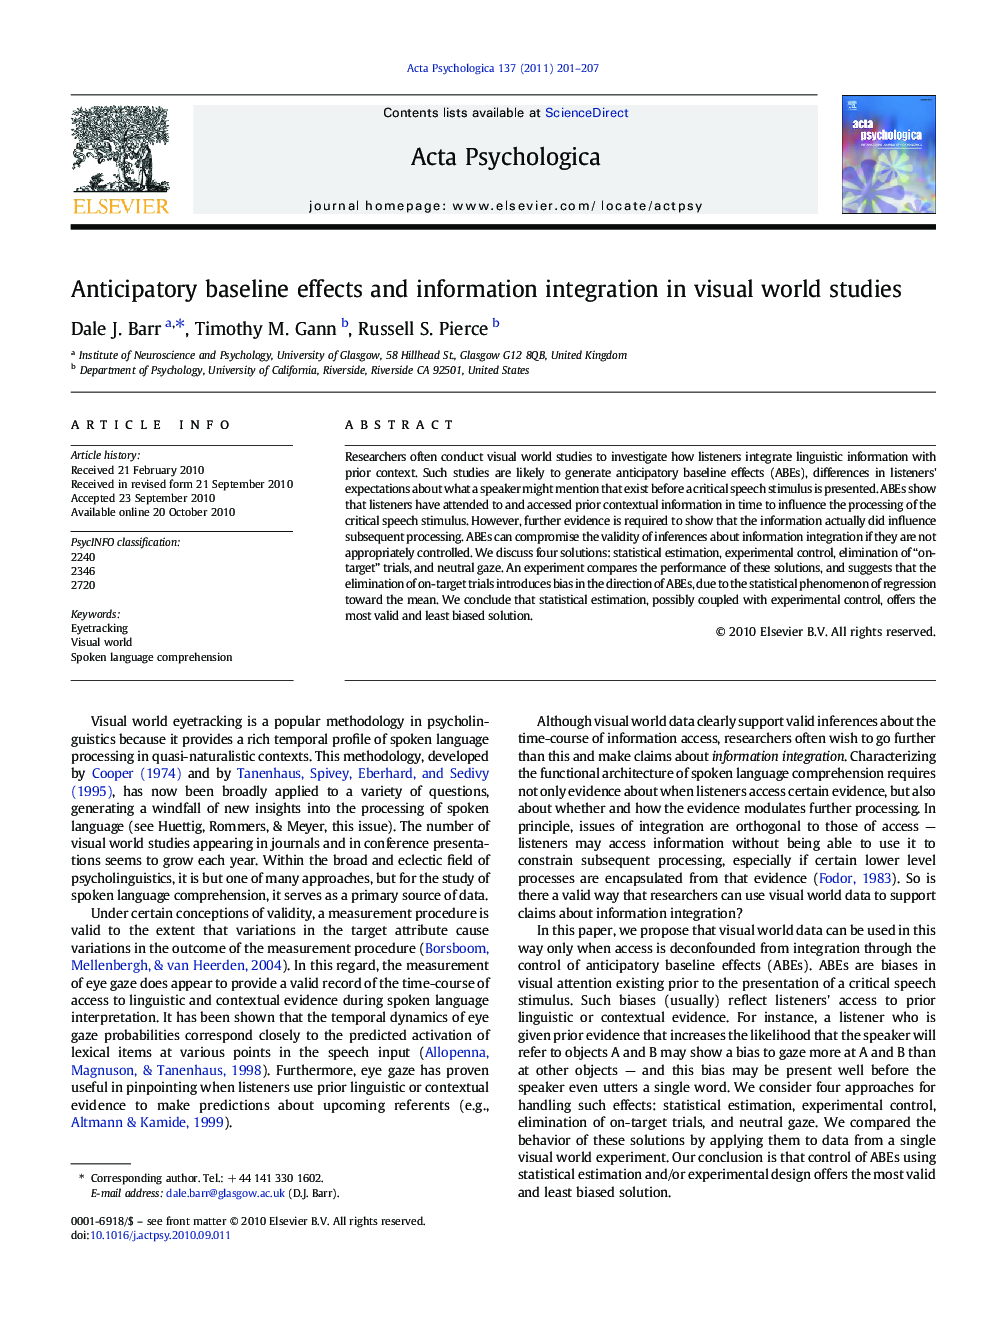 Anticipatory baseline effects and information integration in visual world studies